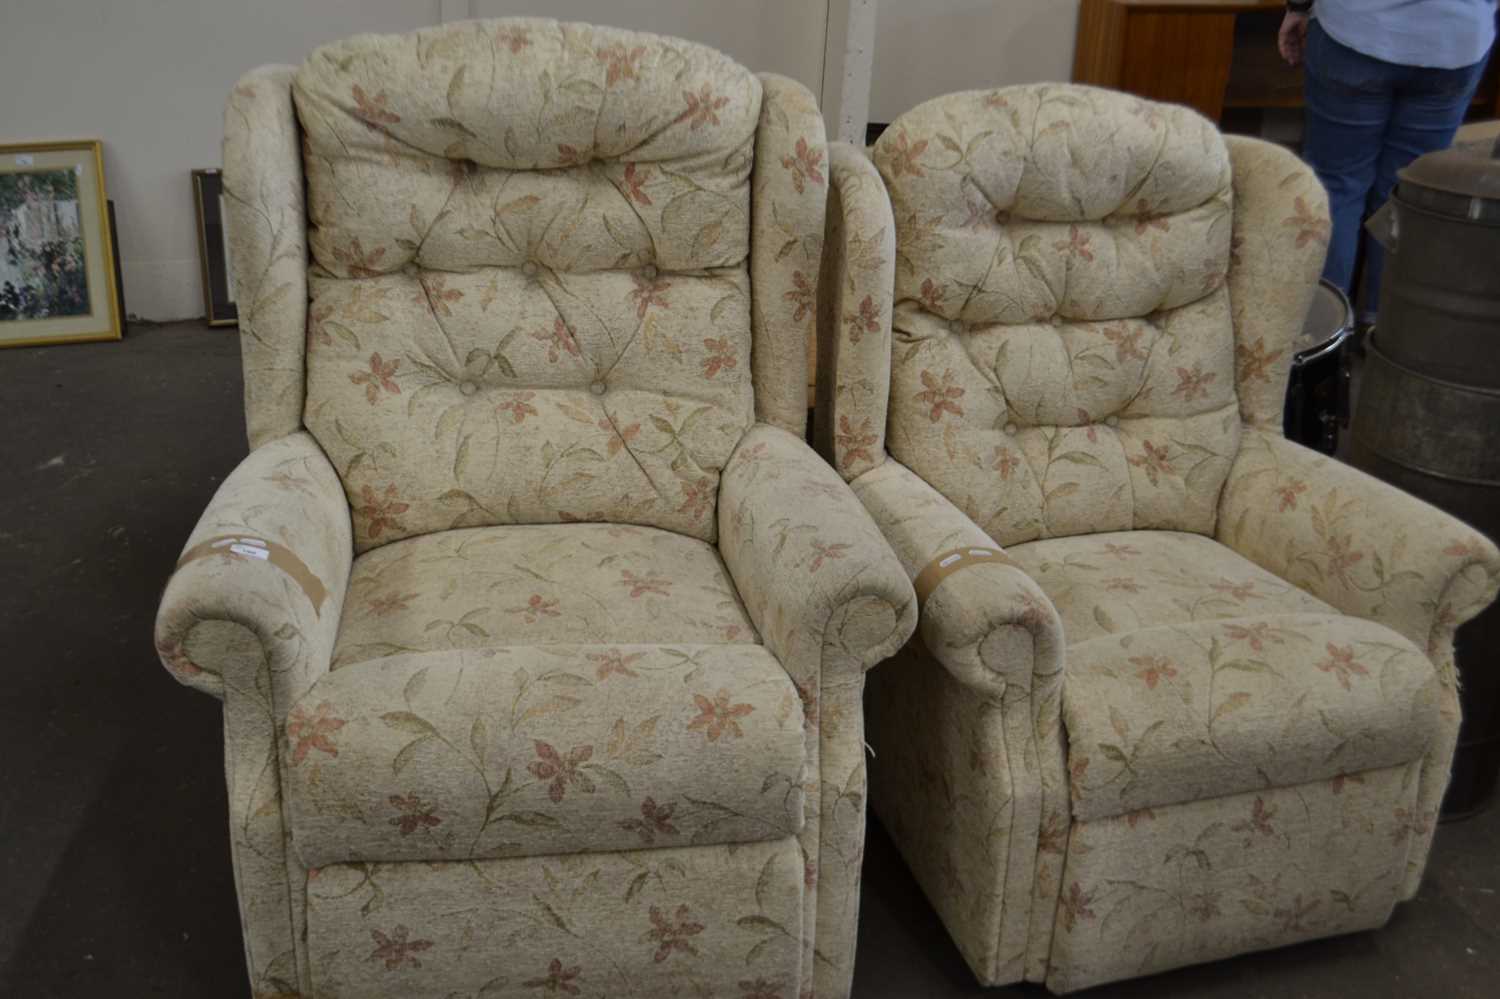 Near pair of upholstered recliners